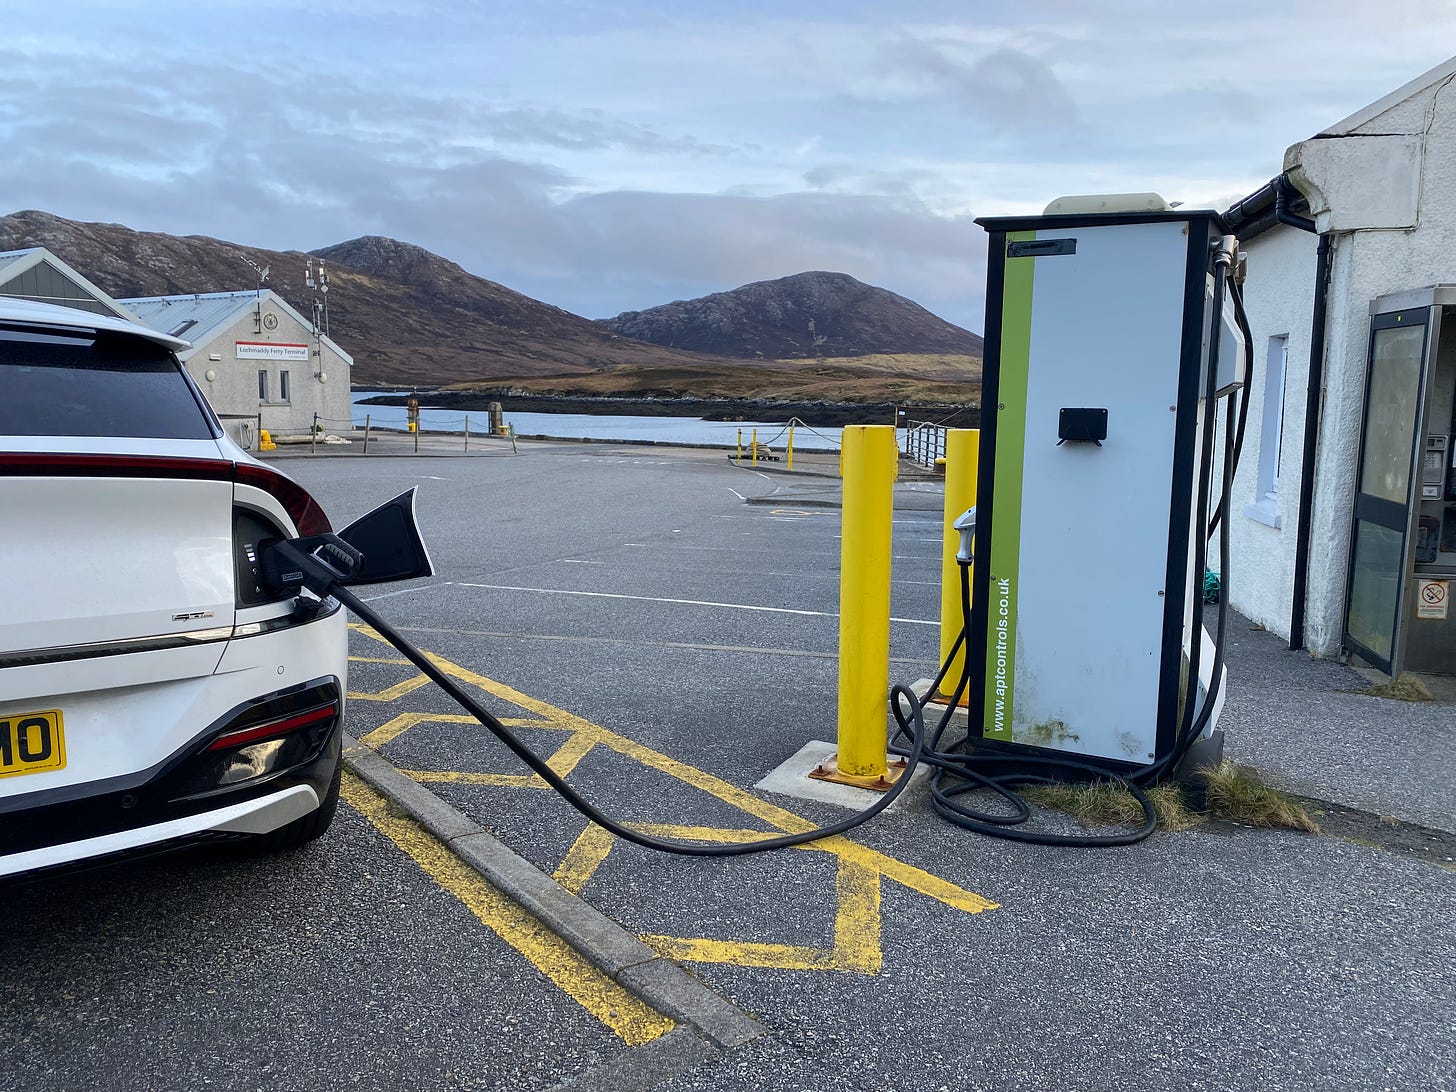 Kia EV6 Electric Vehicle charging at Lochmaddy North Uist Outer Hebrides Andrew Ditton 